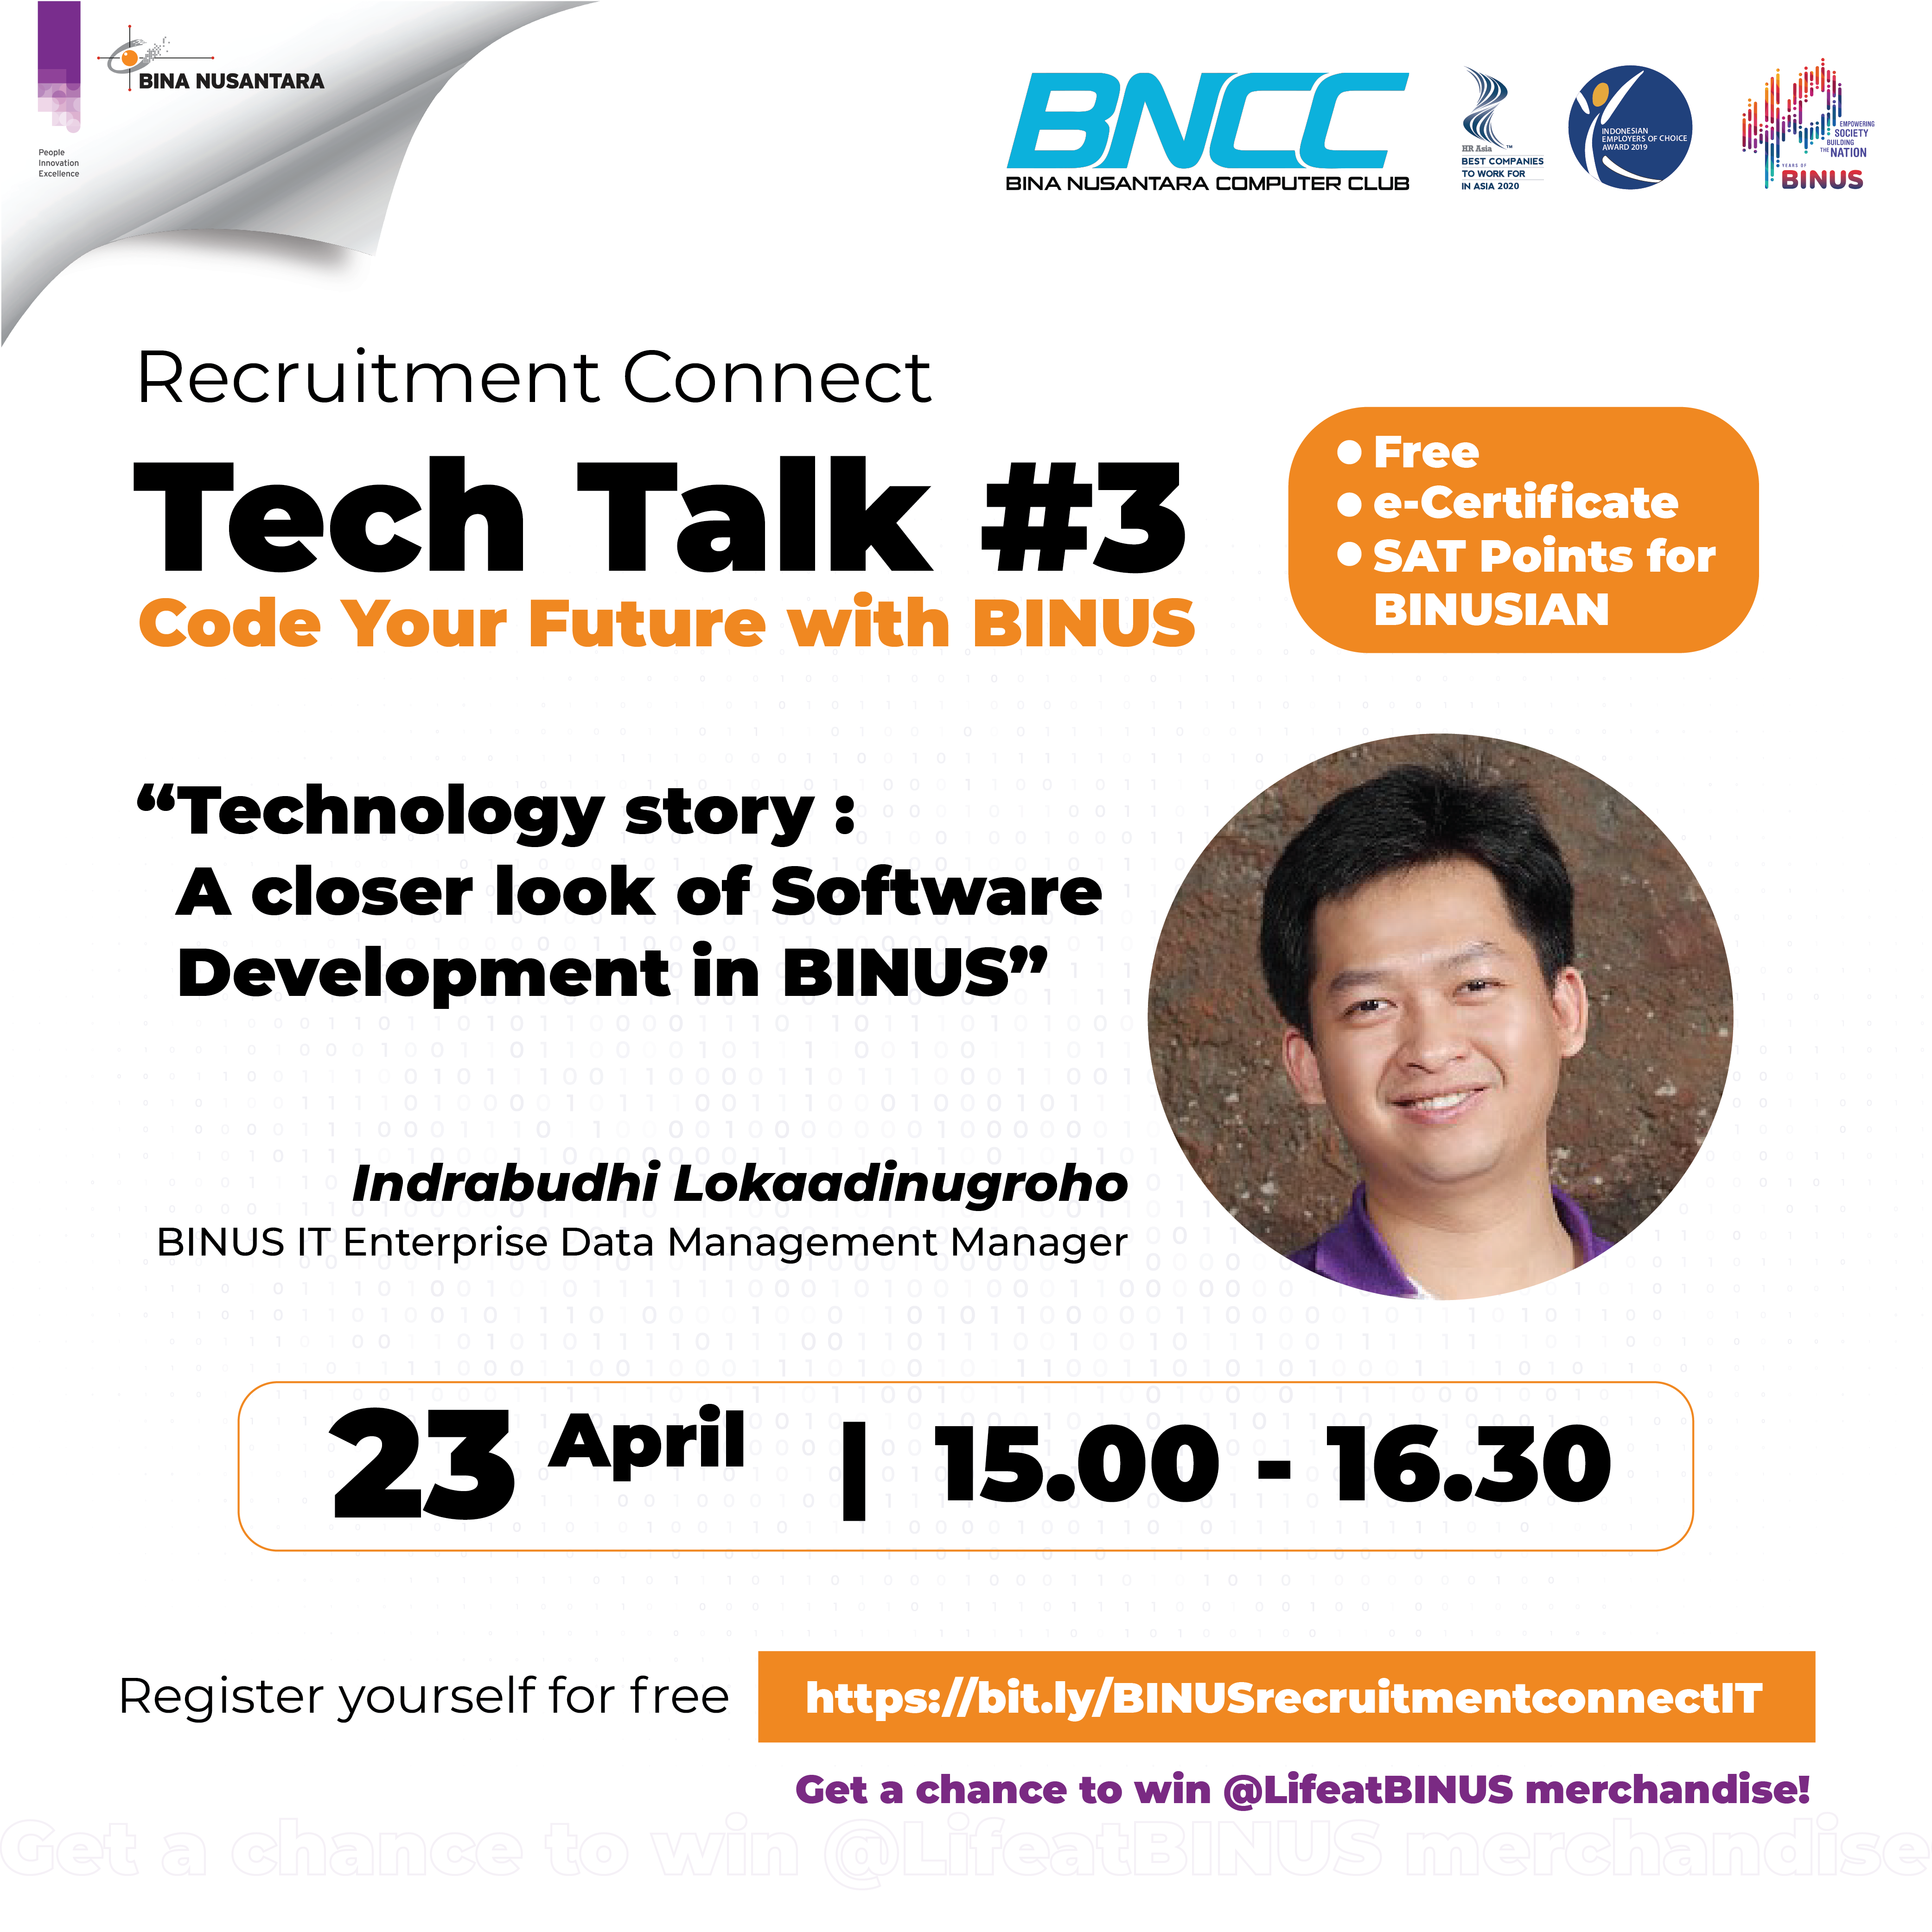 Recruitment Connect Tech Talk series “Code Your Future with BINUS”